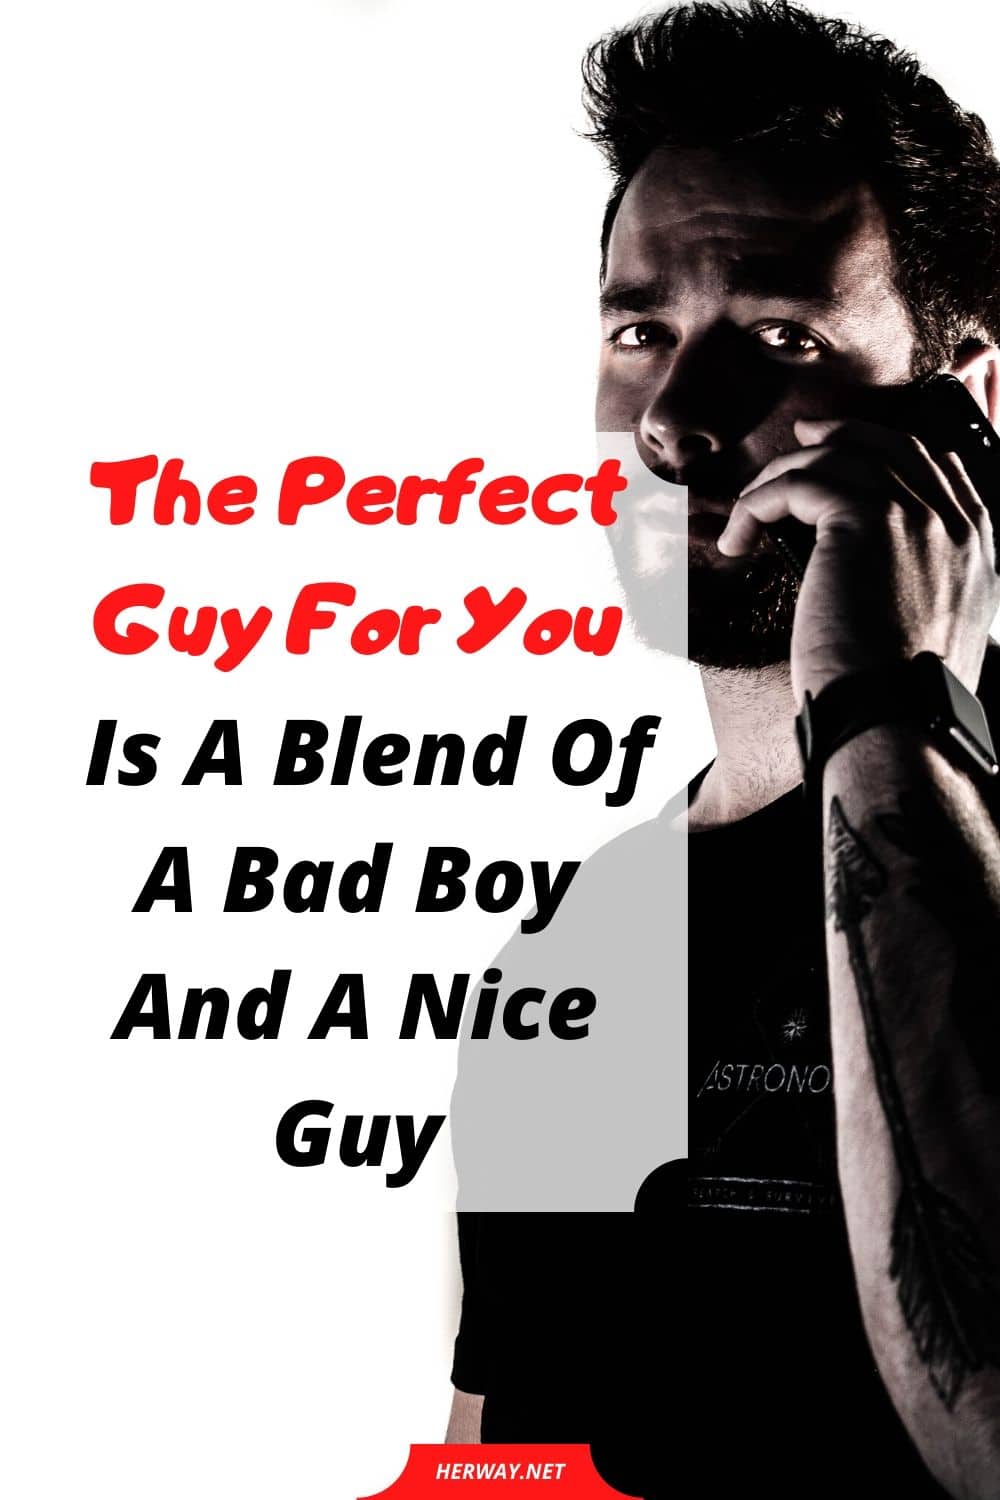 The Perfect Guy For You Is A Blend Of A Bad Boy And A Nice Guy